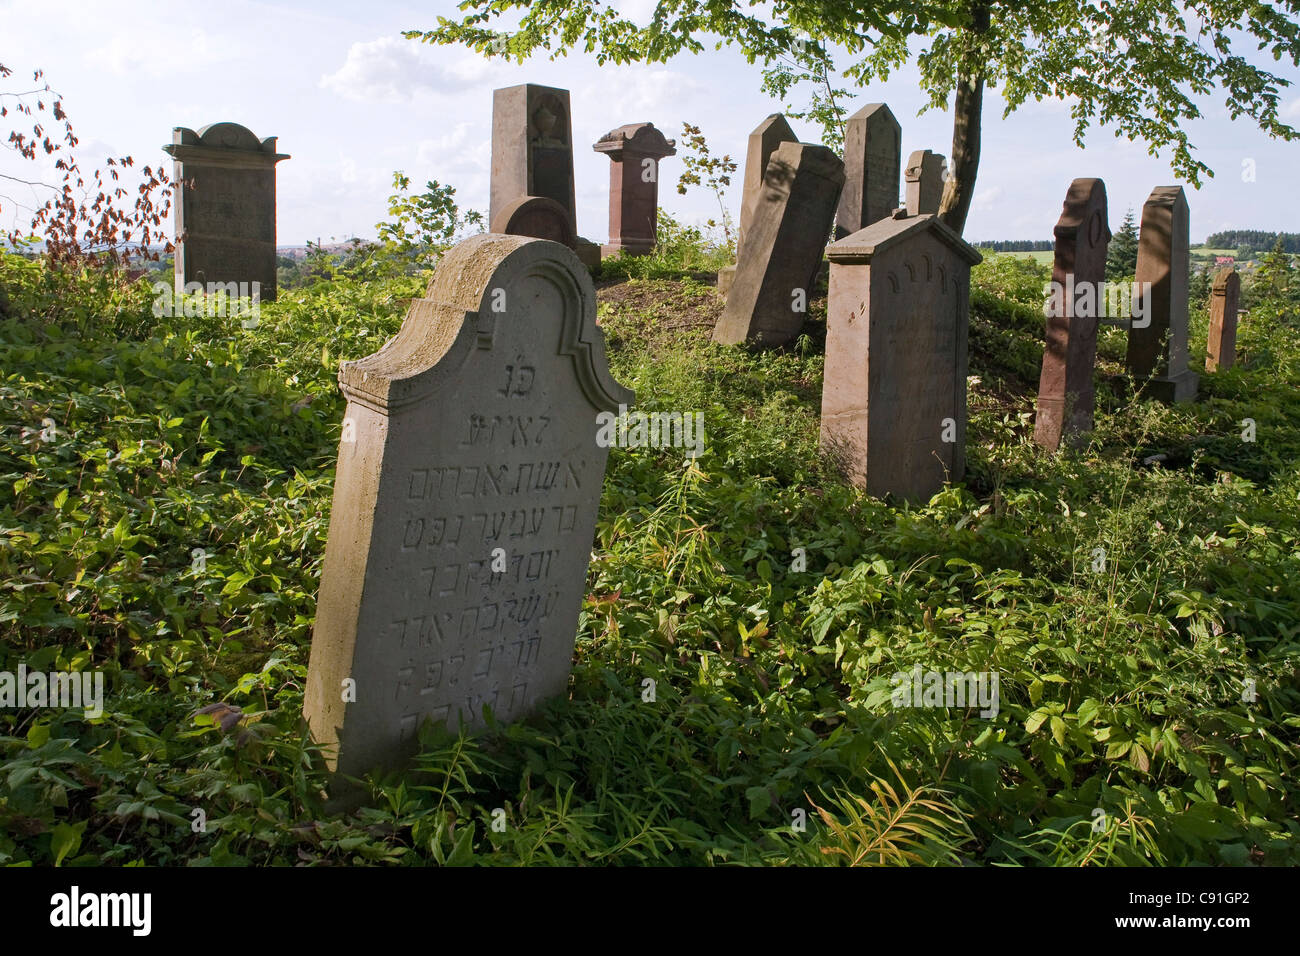 Grave stones in a Jewish cemetery, Seesen, Lower Saxony, Germany Stock Photo